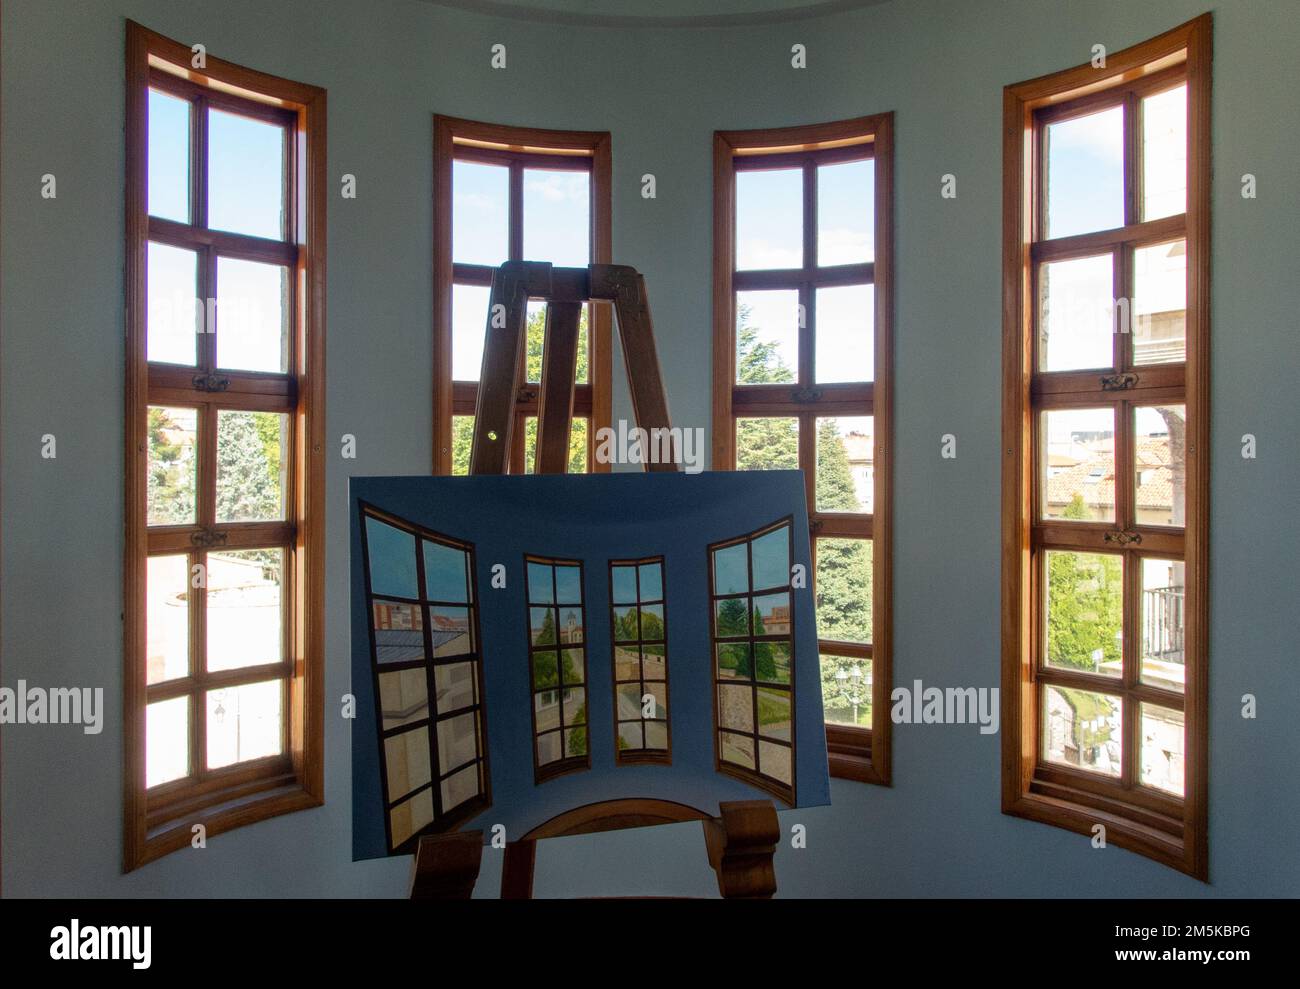 Double view. Window in a turret of the Casa de los Botines building by architect Antoni Gaudí with a painting of the same view. Stock Photo